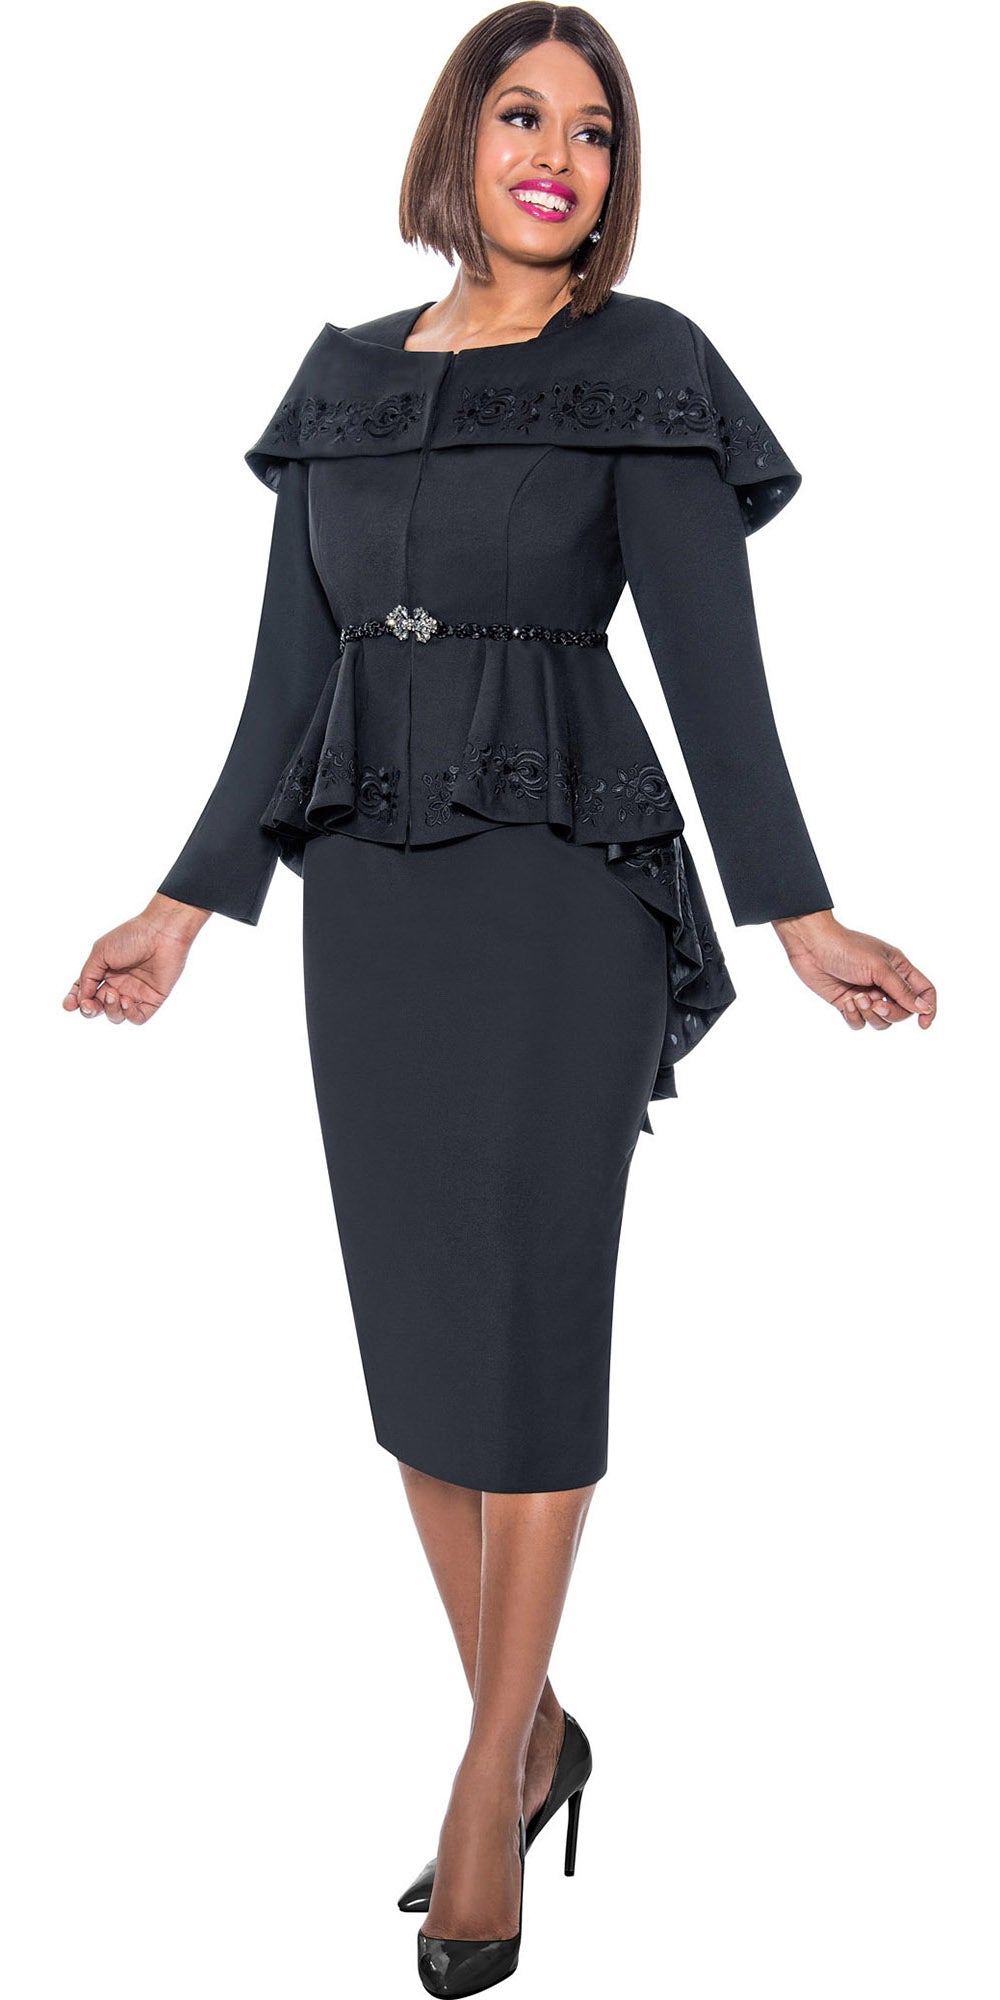 Divine Queen - DQ2162 - 2PC Embroidered Capelet High Low Peplum Skirt Suit